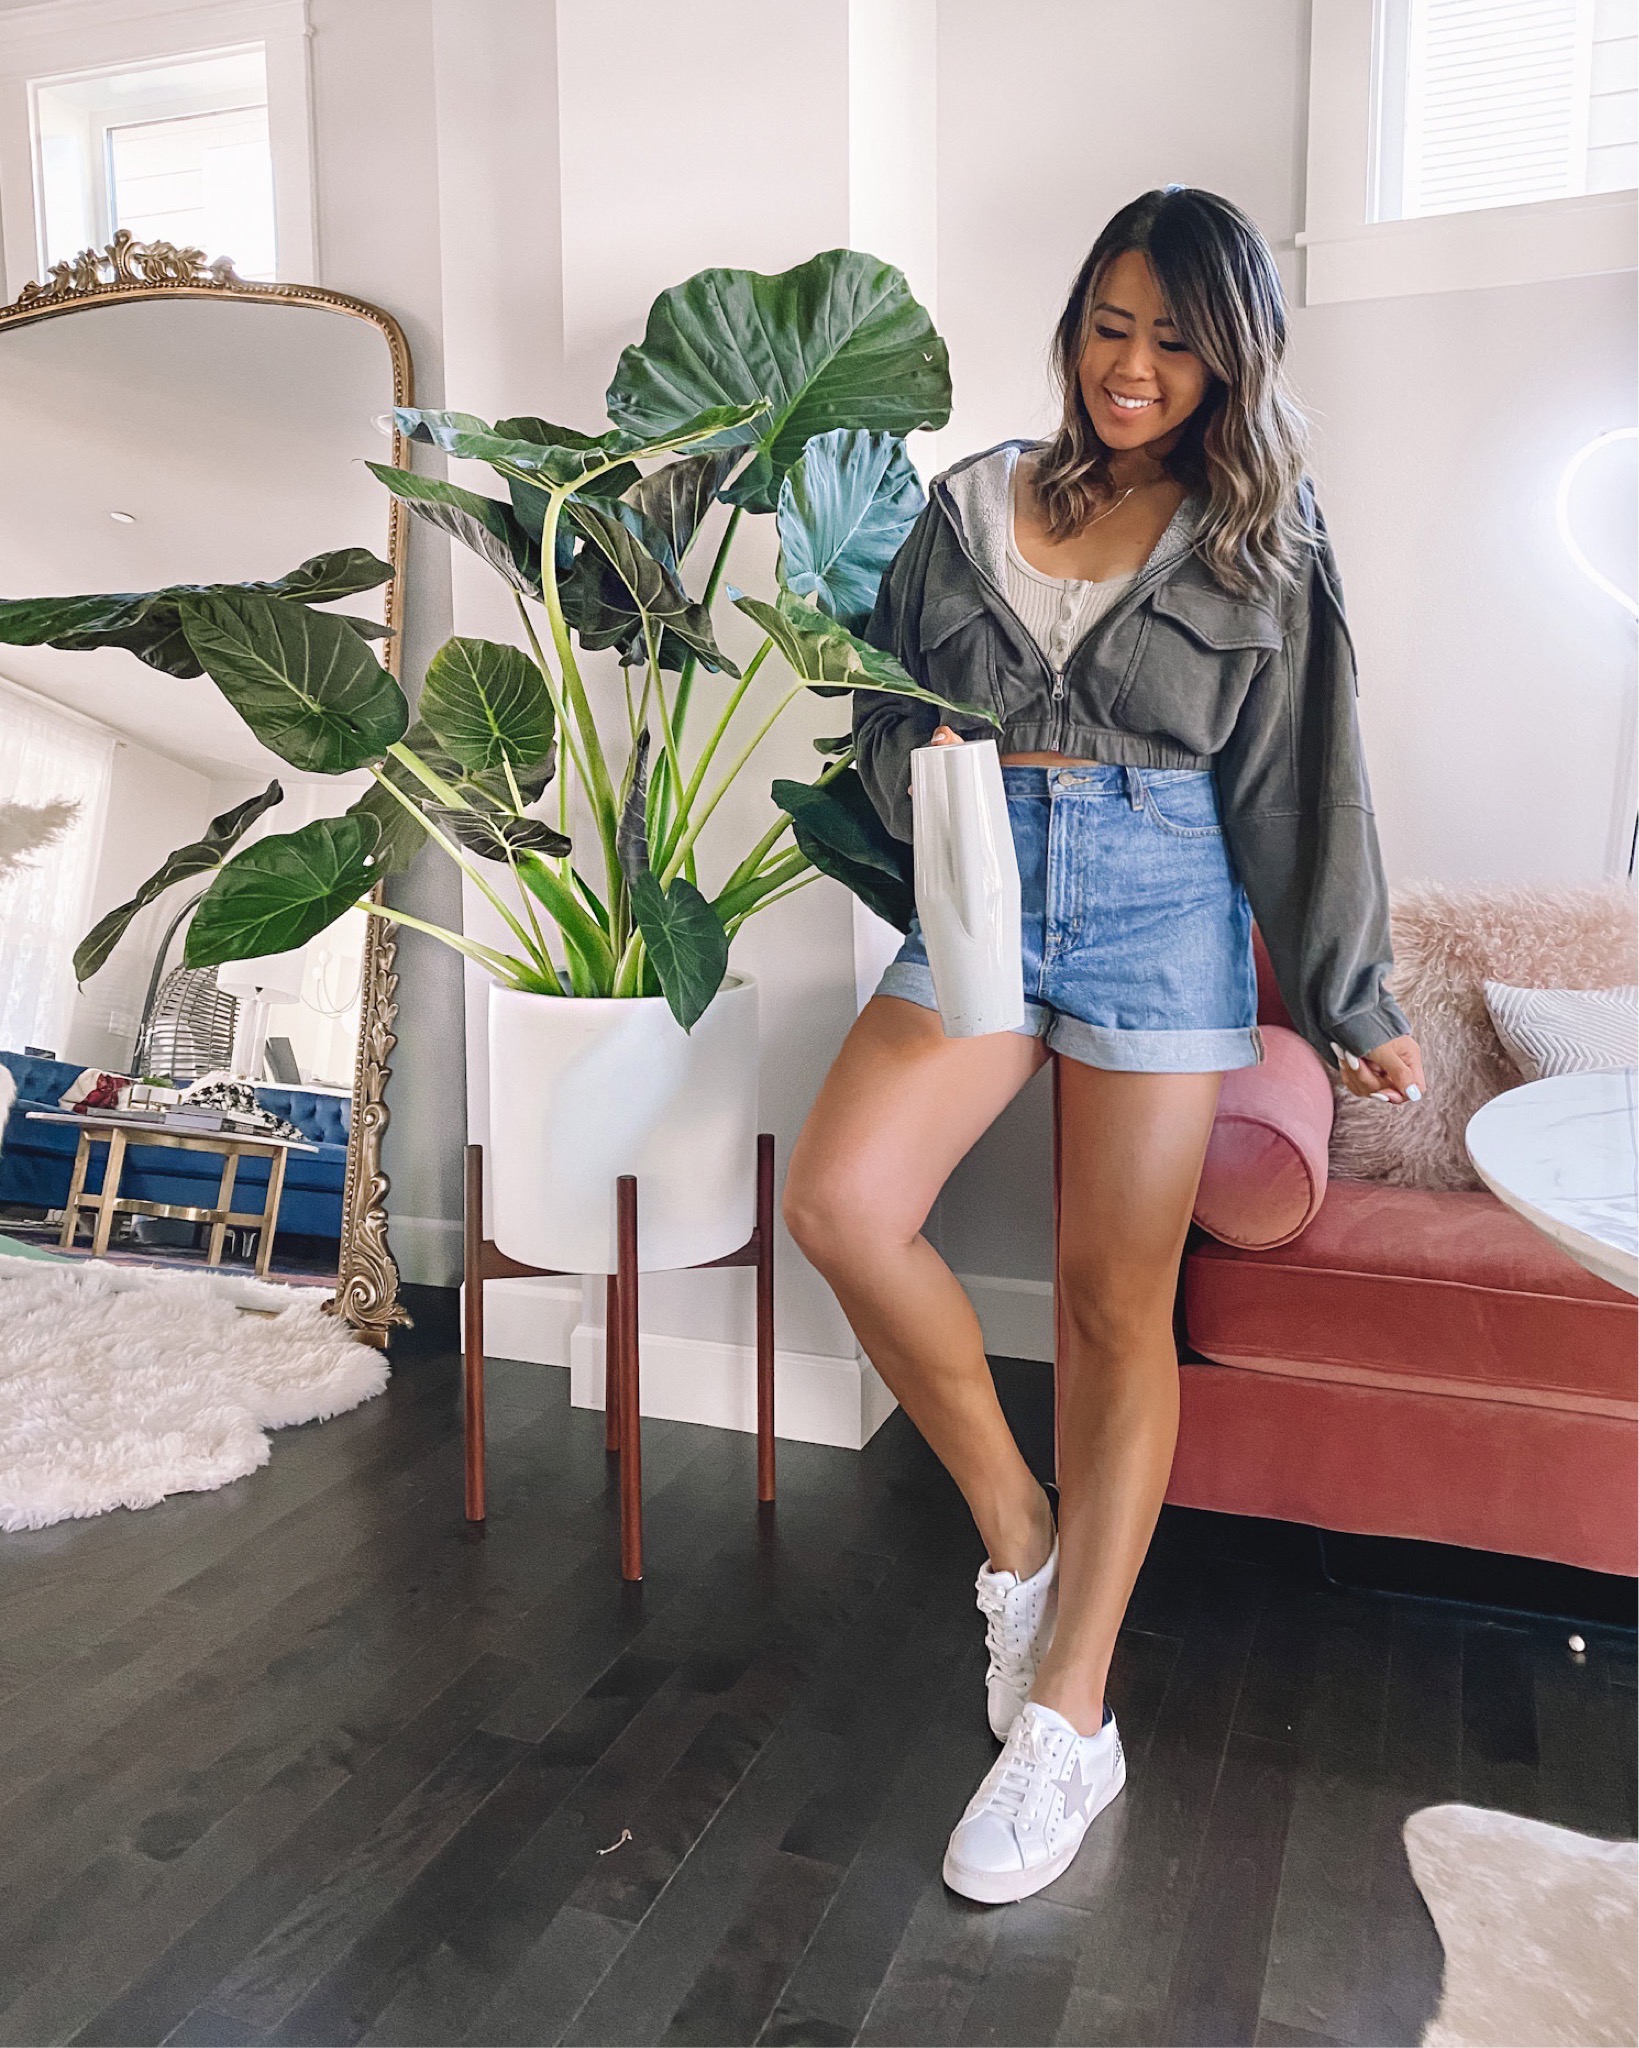 Urban Outfitters Promo Code - Outfit Ideas - Sabrina Gypsy Tan 5